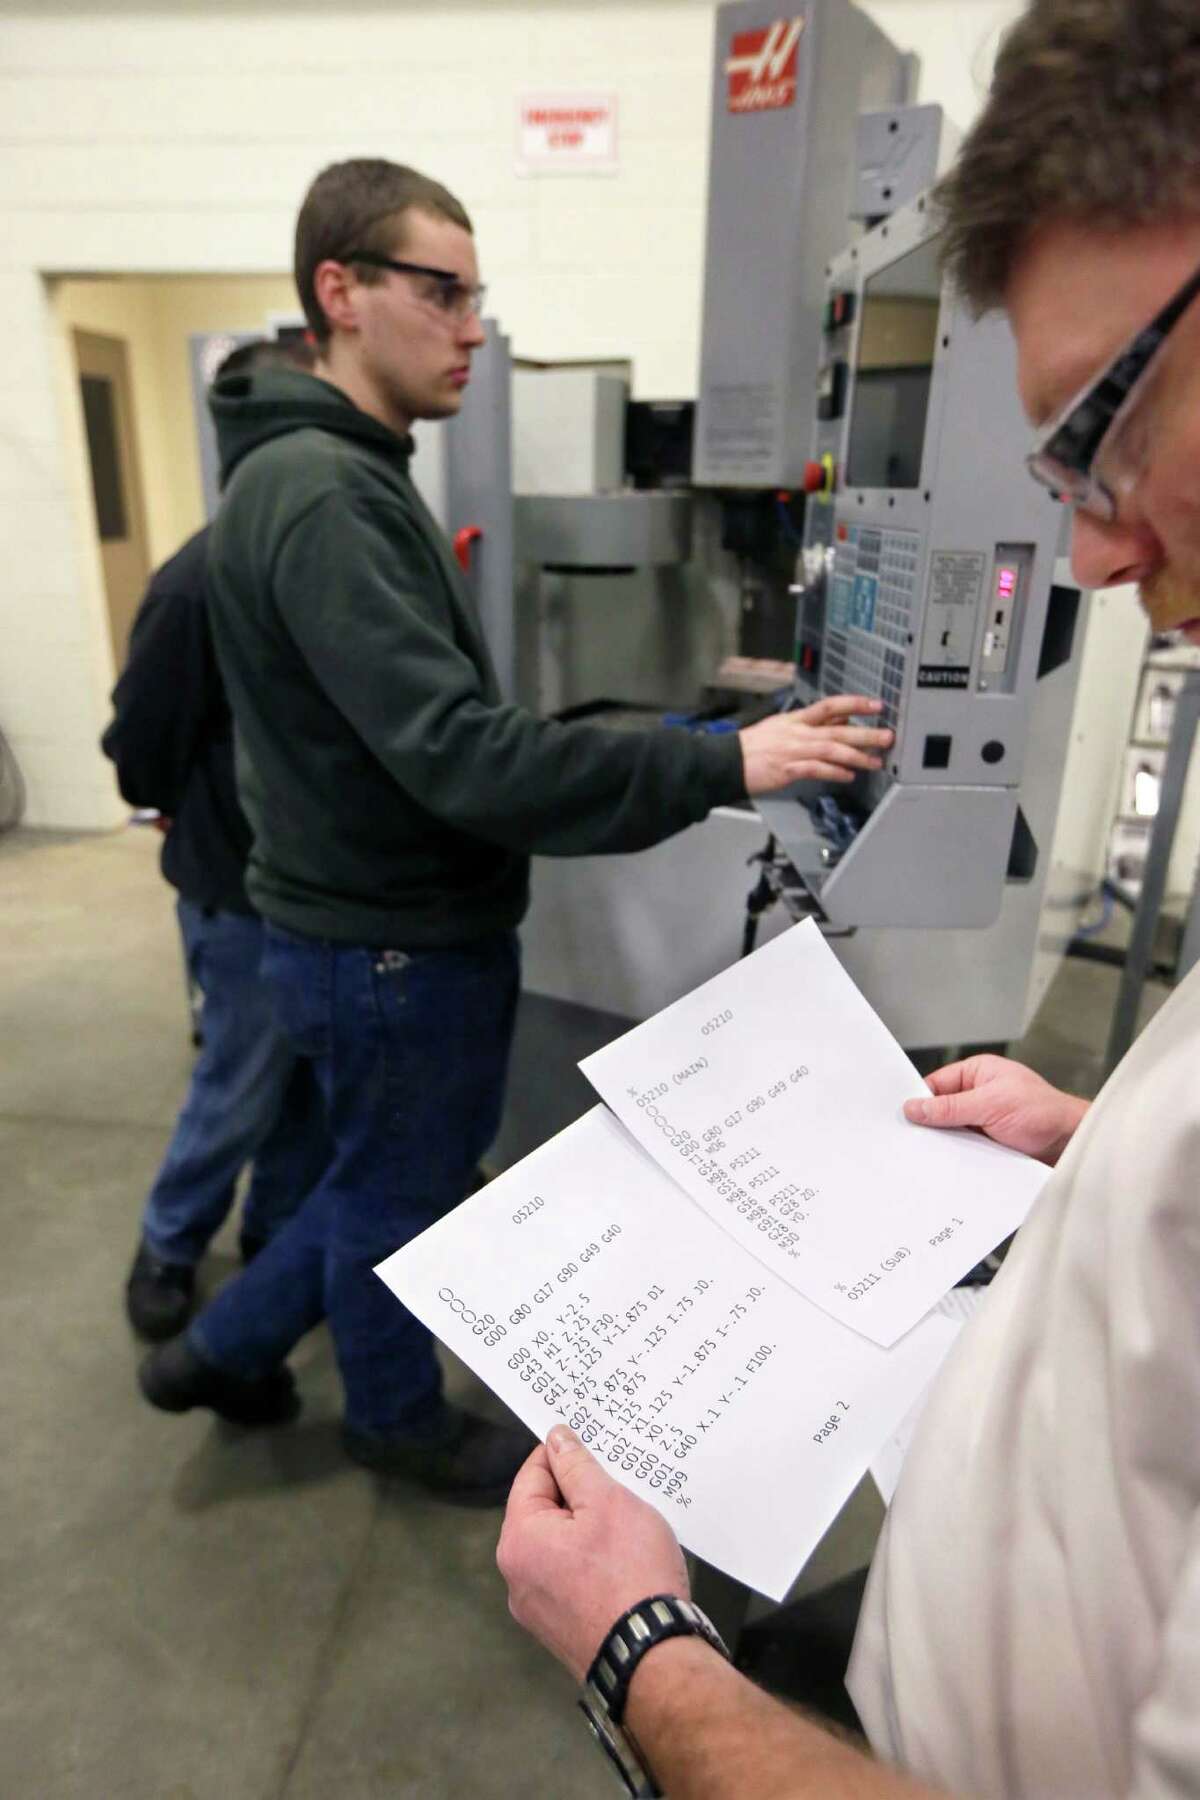 In a photo from Wednesday, Feb. 11, 2015 in Lansing, Mich., Lansing Community College adjunct instructor Marty Kroell looks over computer code as Travis Reglin works on a computer numerical control mill in the advance precision machining class. Gov. Rick Snyder wants to re-establish vocational and technical schooling as an âequally honorable, equally important and equally well-compensatedâ career track. To that end, his new budget proposes a $36 million, or 75 percent, increase in spending on trades training, technical education and career planning. (AP Photo/Carlos Osorio)